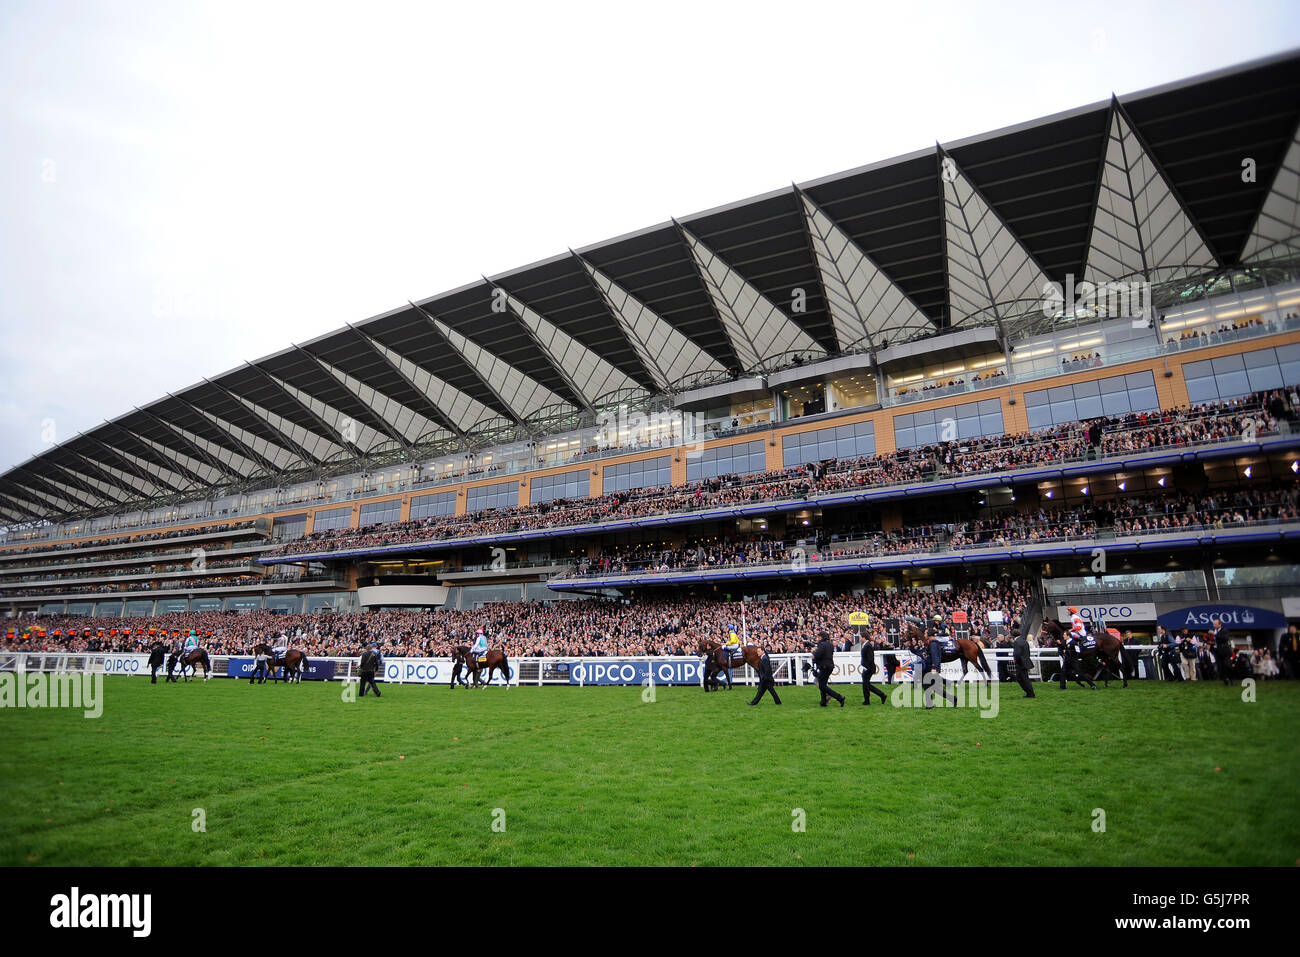 General view of the grandstand at Ascot racecourse as the horses parade in front of them to the start line Stock Photo